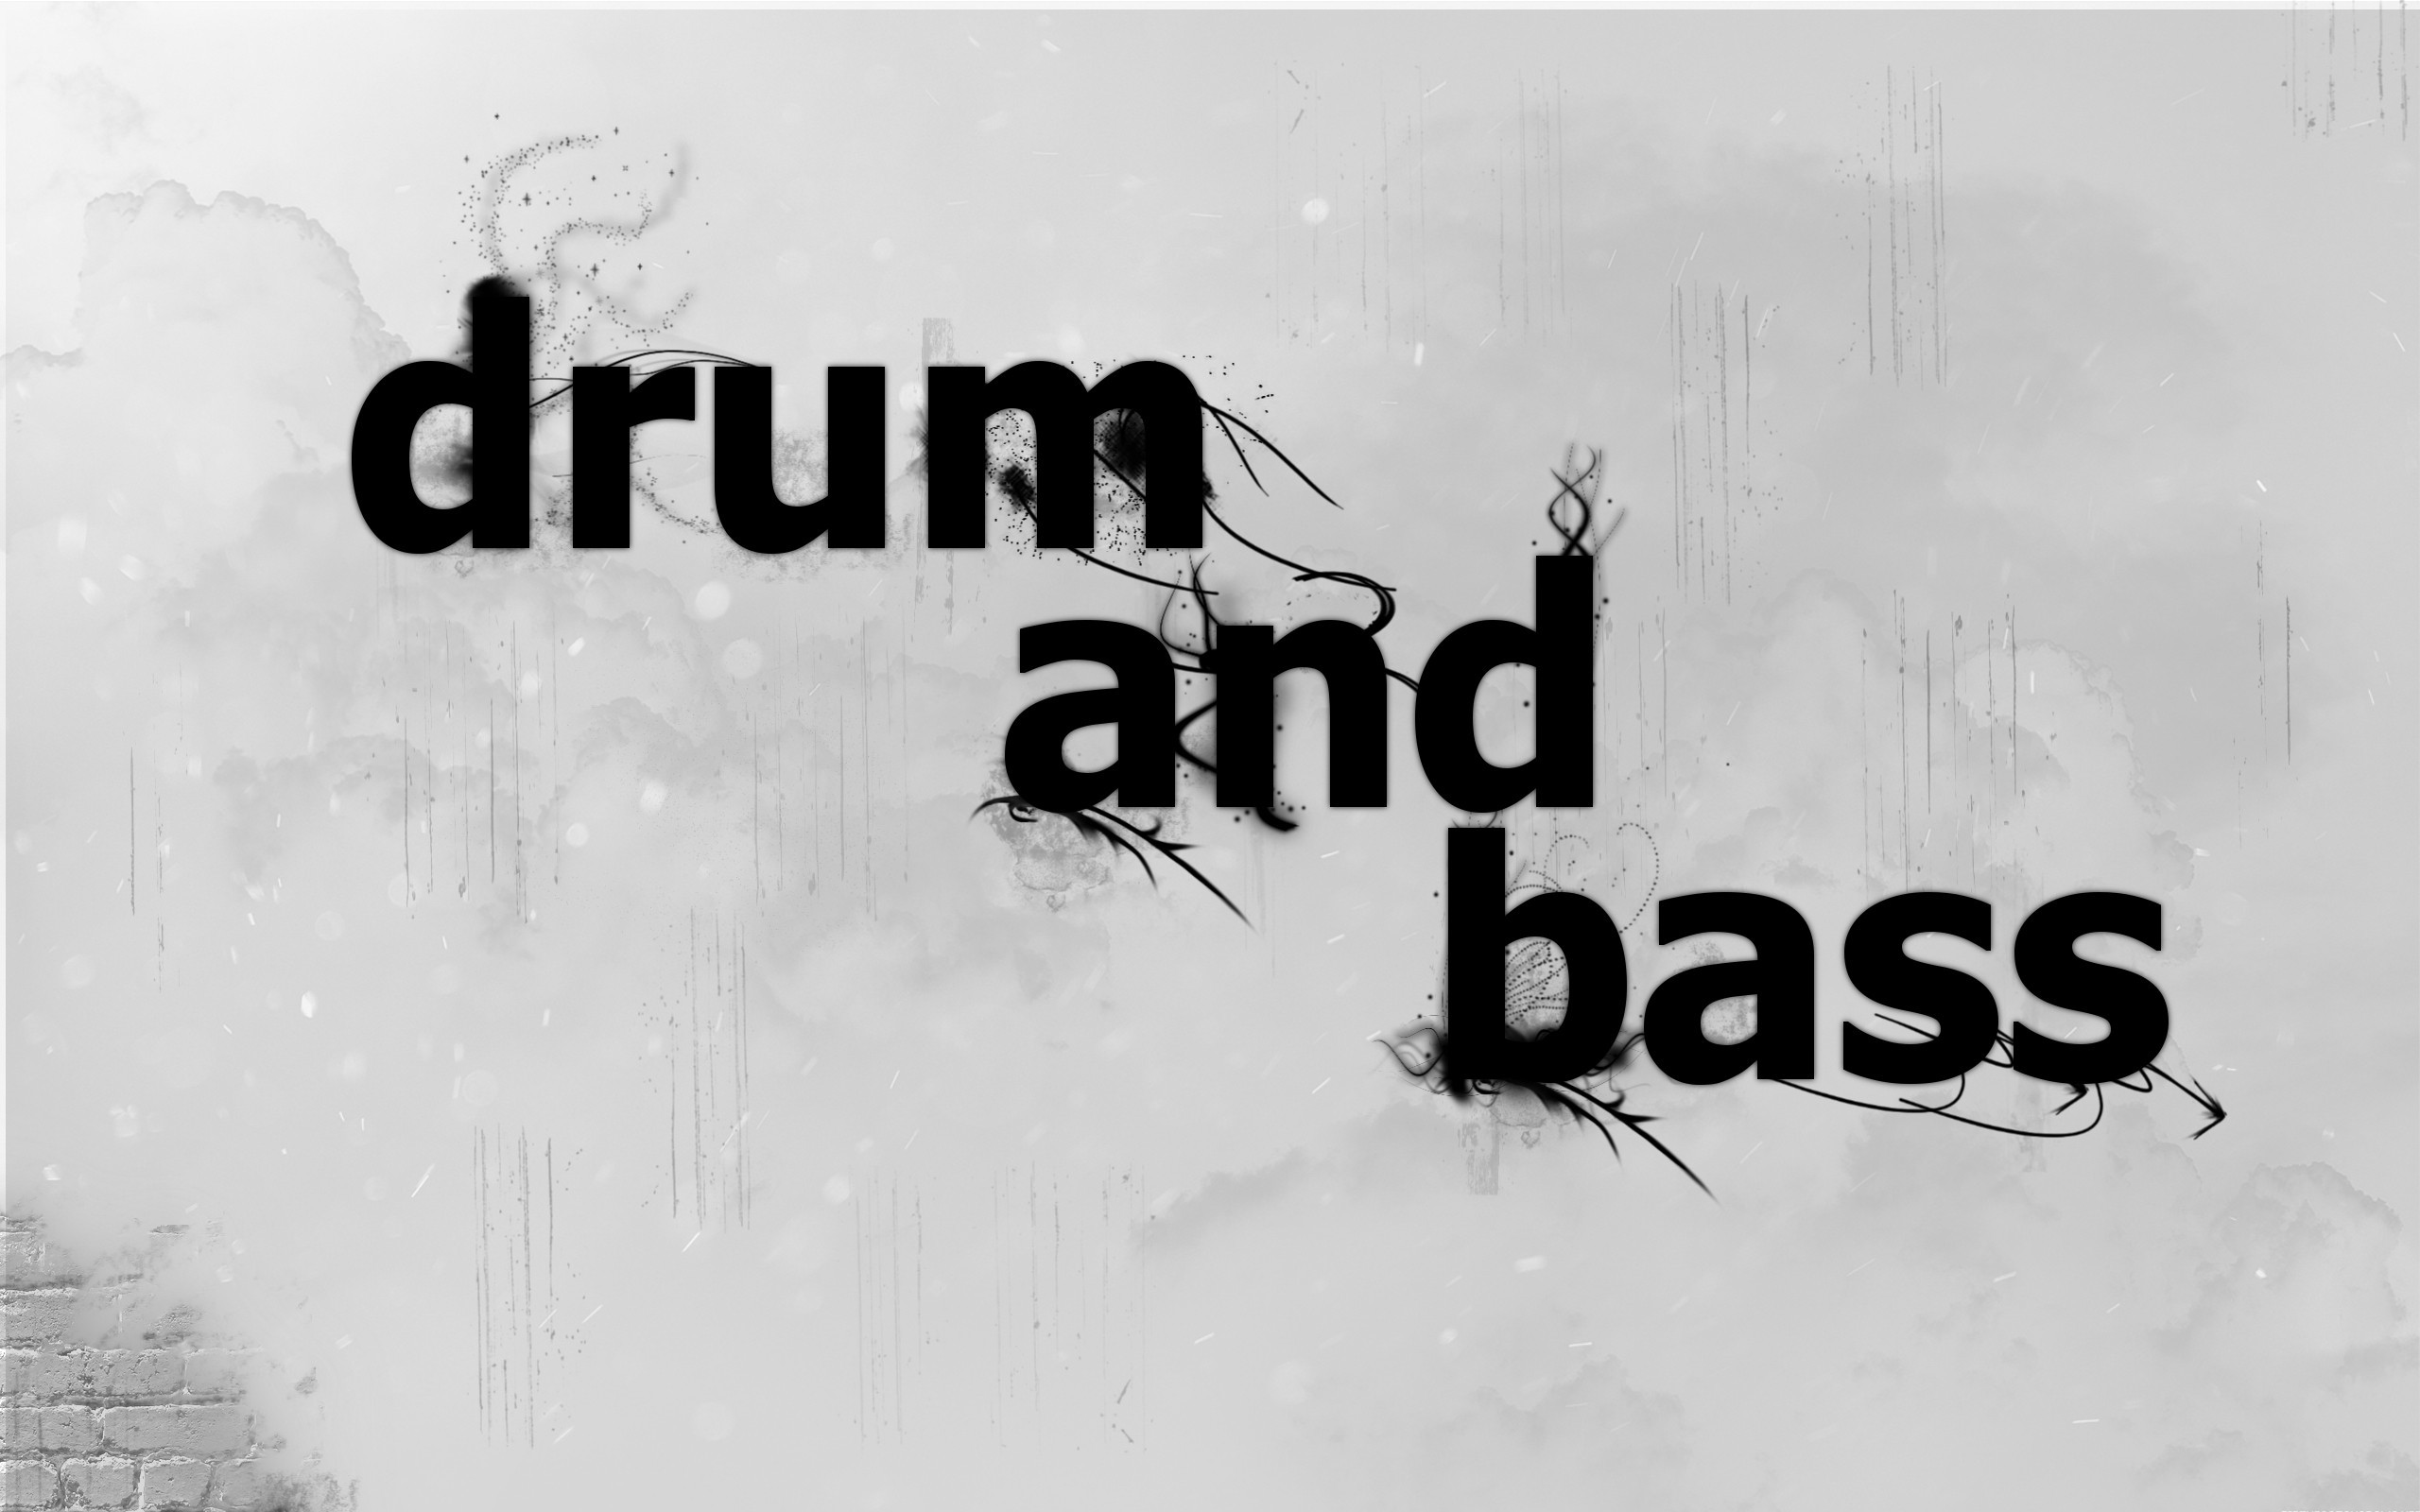 Drum and bass лучшее. Drum and Bass картинки. Drum and Bass обои. Драм н басс. Drum and Bass логотип.